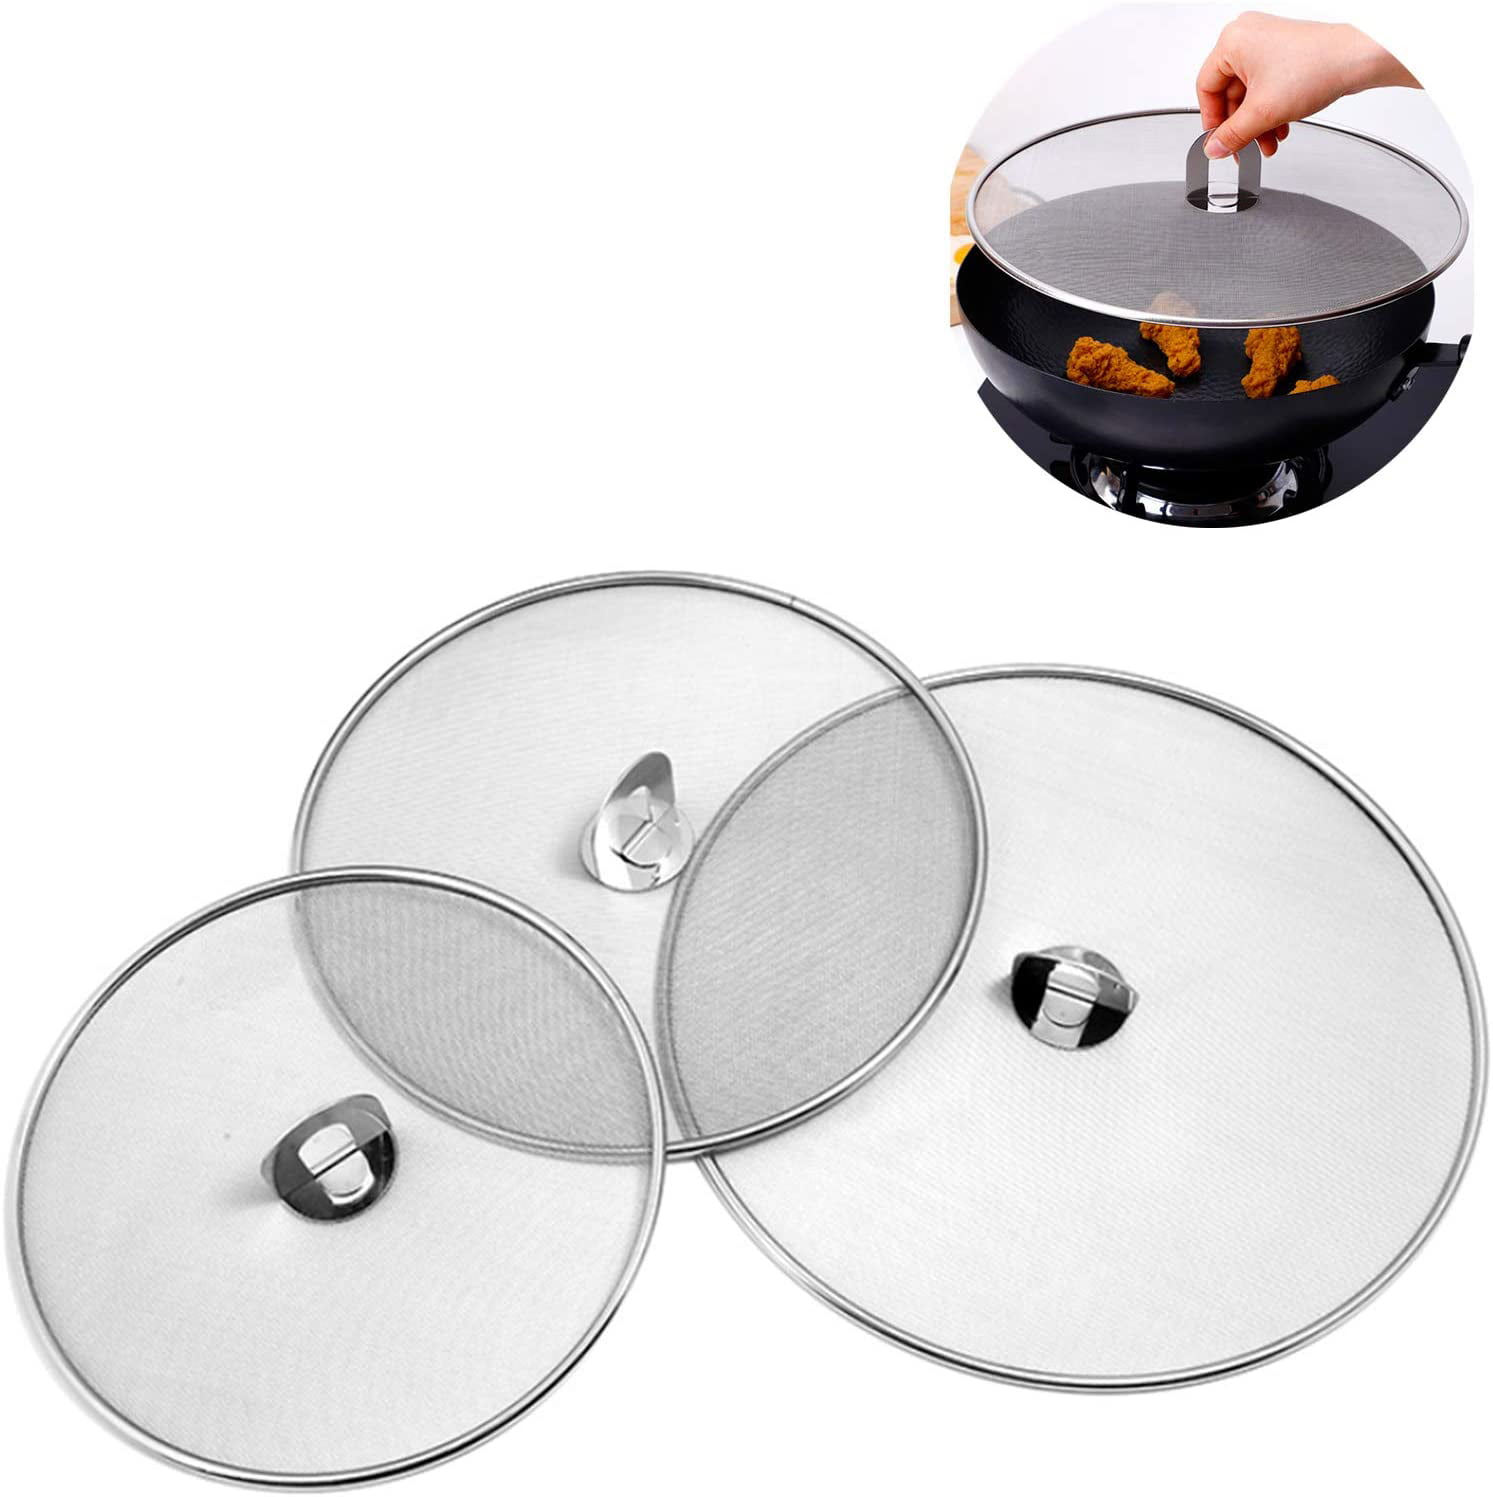 Stainless Steel Pan Splatter Guard Grease Guard Shield for Kitchen Frying Pan Cooking Supplies 9.8 Inch 11.5 Inch and 13 Inch 3 Pieces Grease Splatter Screen Mesh